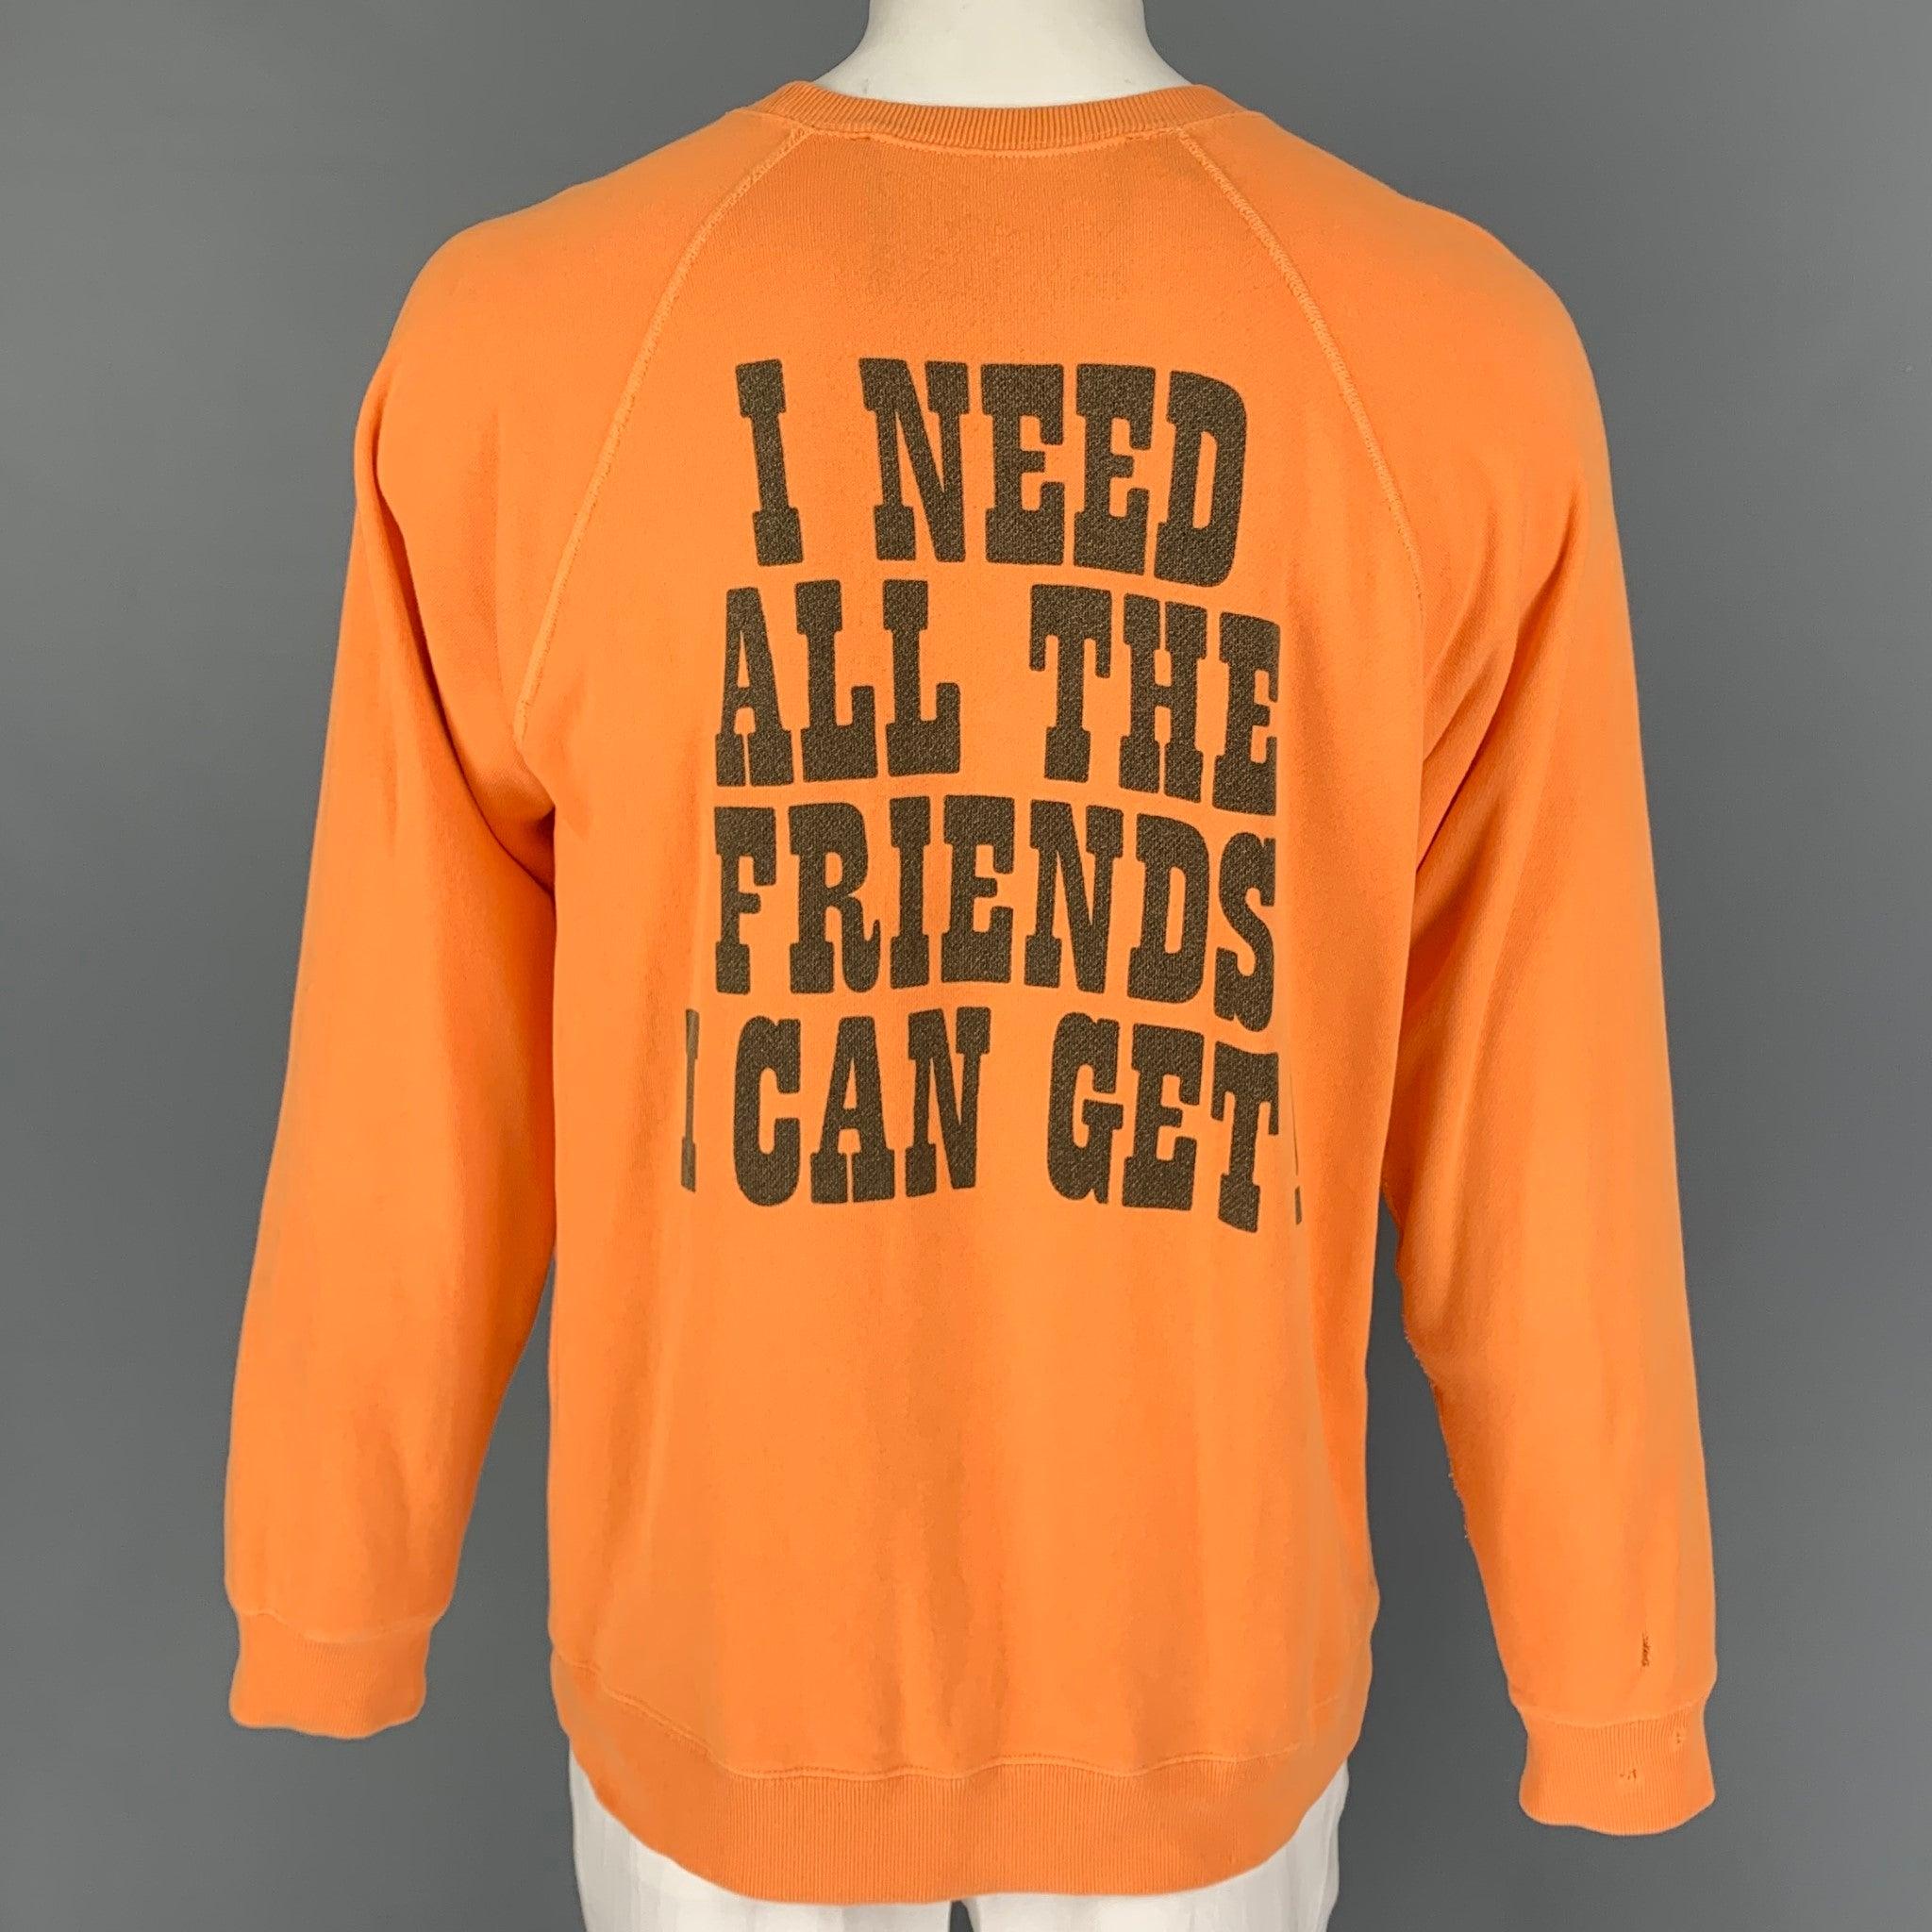 MARC JACOBS x PEANUTS sweatshirt comes in a orange & black cotton featuring a front & back graphic design, distresses details, raglan sleeves, and a crew-neck.
Very Good
Pre-Owned Condition. 

Marked:   L  

Measurements: 
 
Shoulder: 17 inches